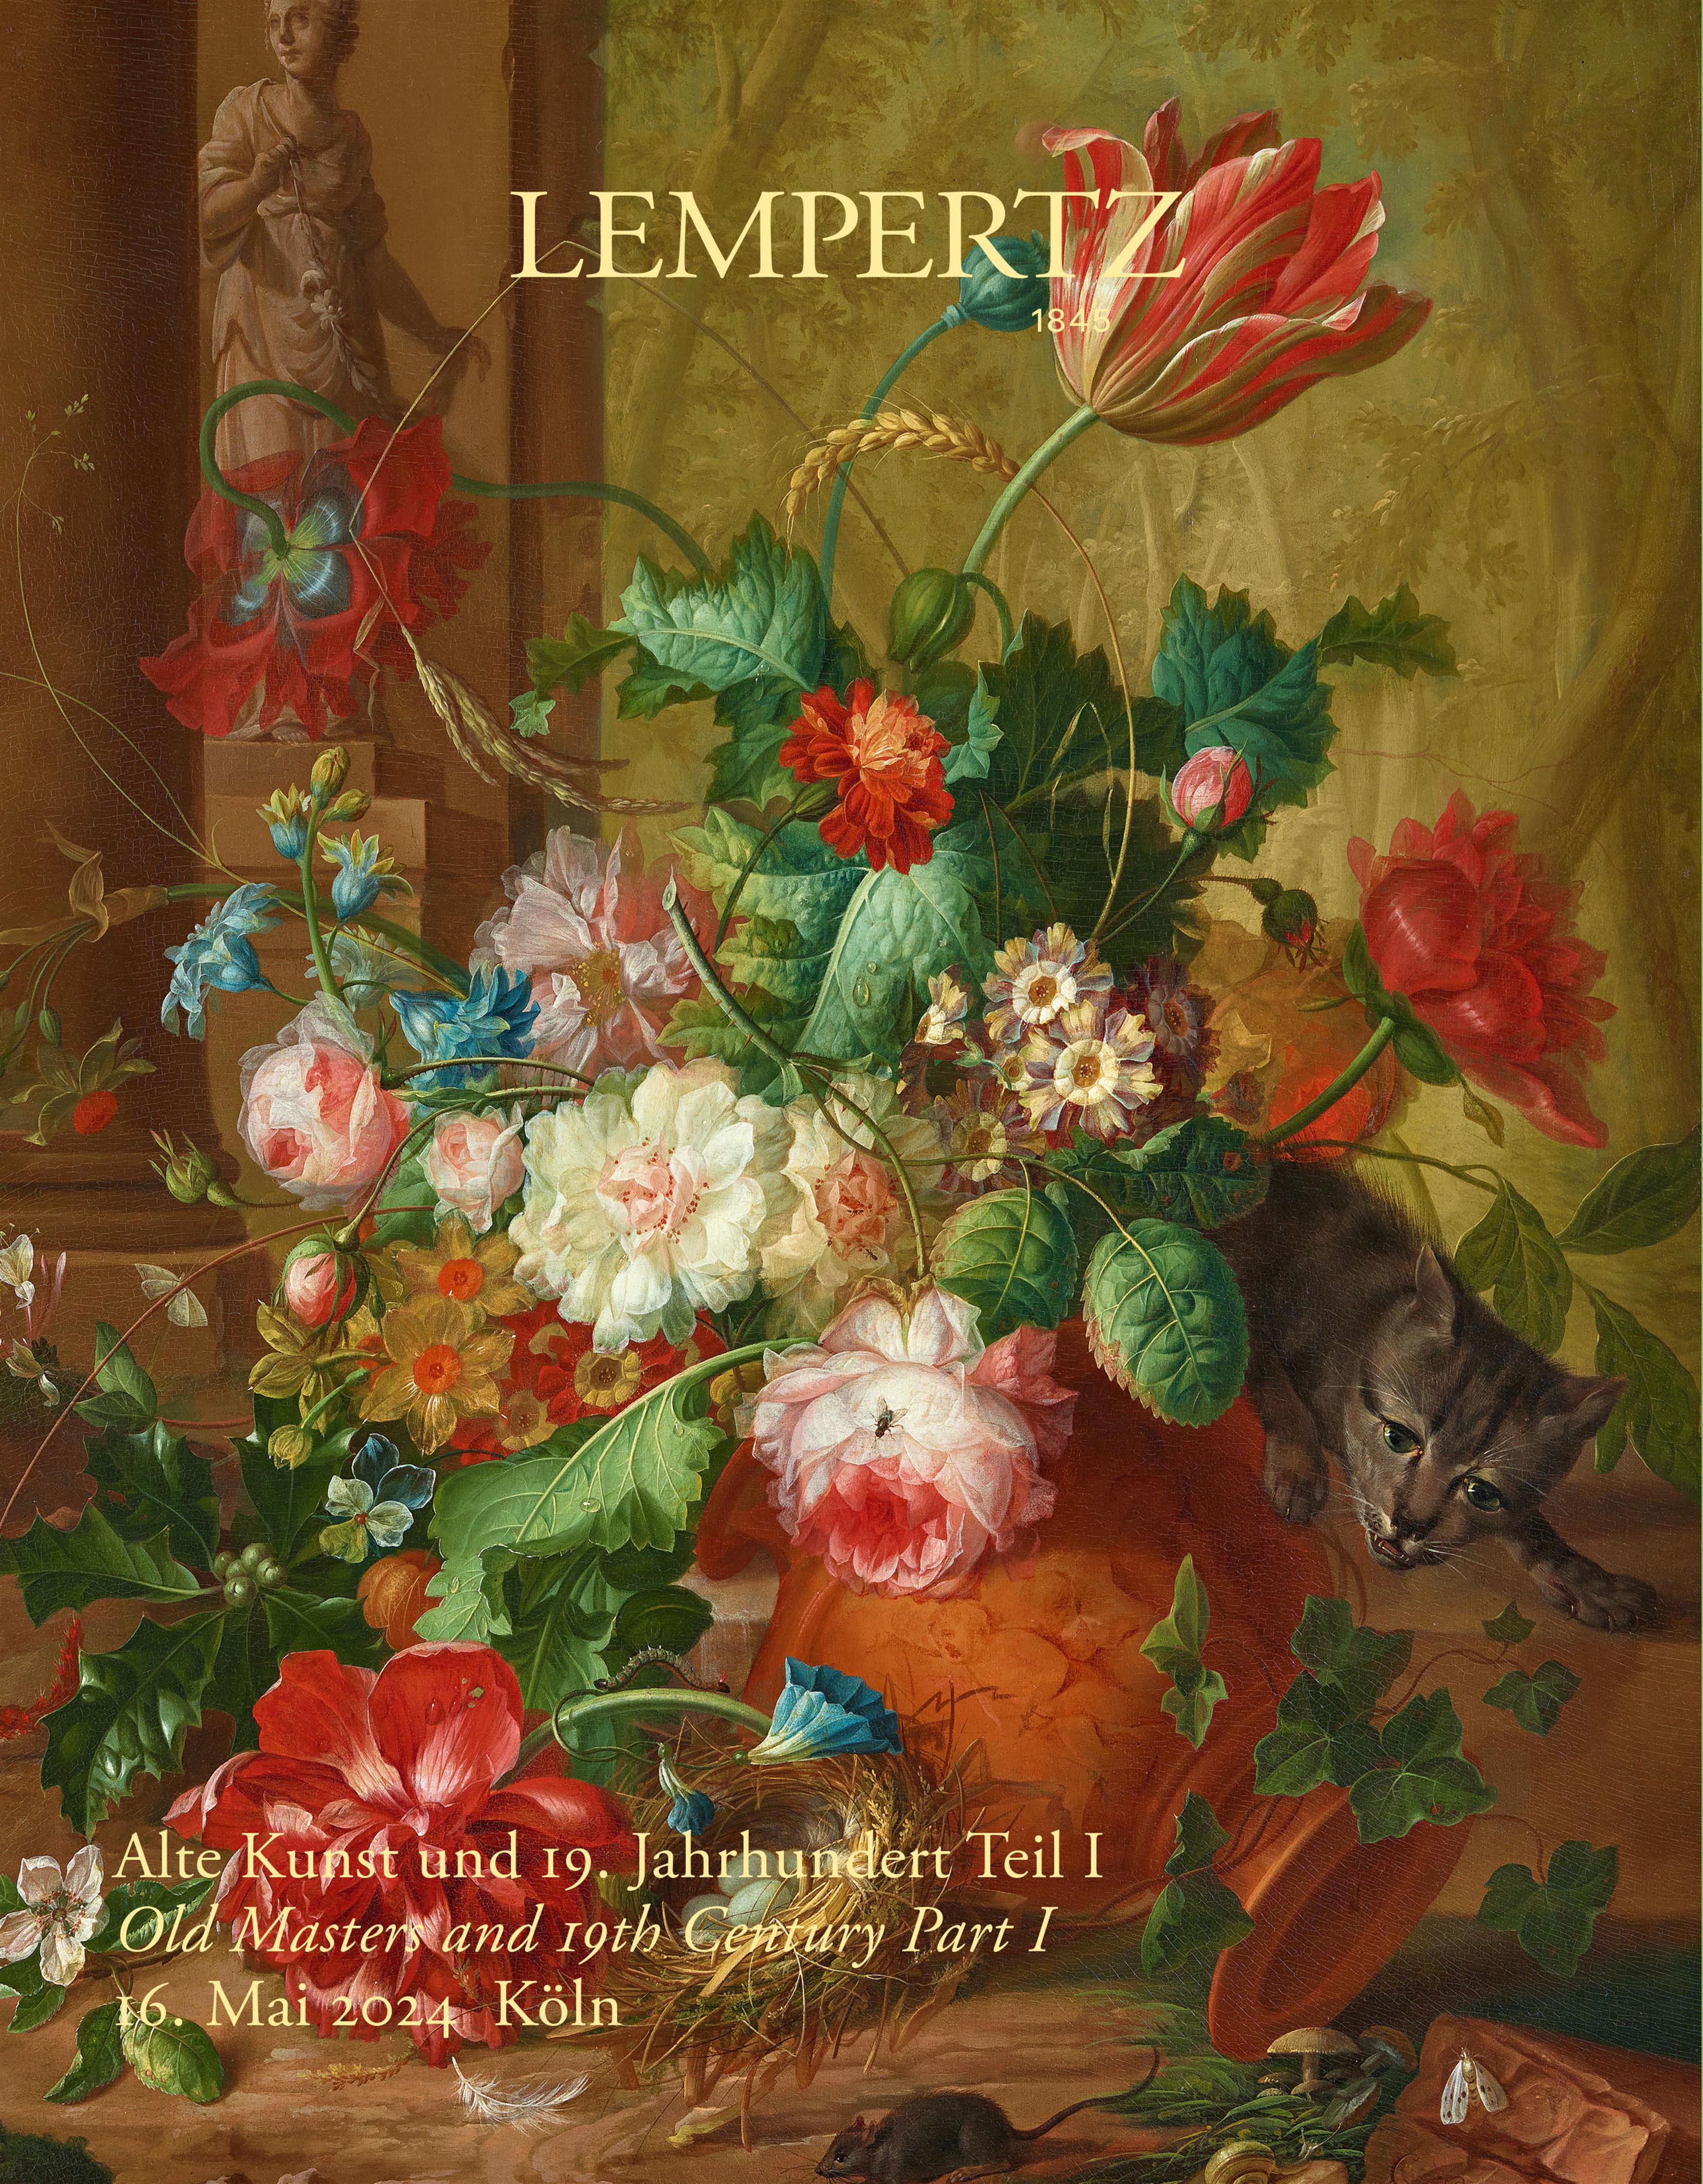 Catalogue - Old Masters and 19th Century, Part I - Online Catalogue - Auction 1245 – Purchase valuable works of art at the next Lempertz-Auction!